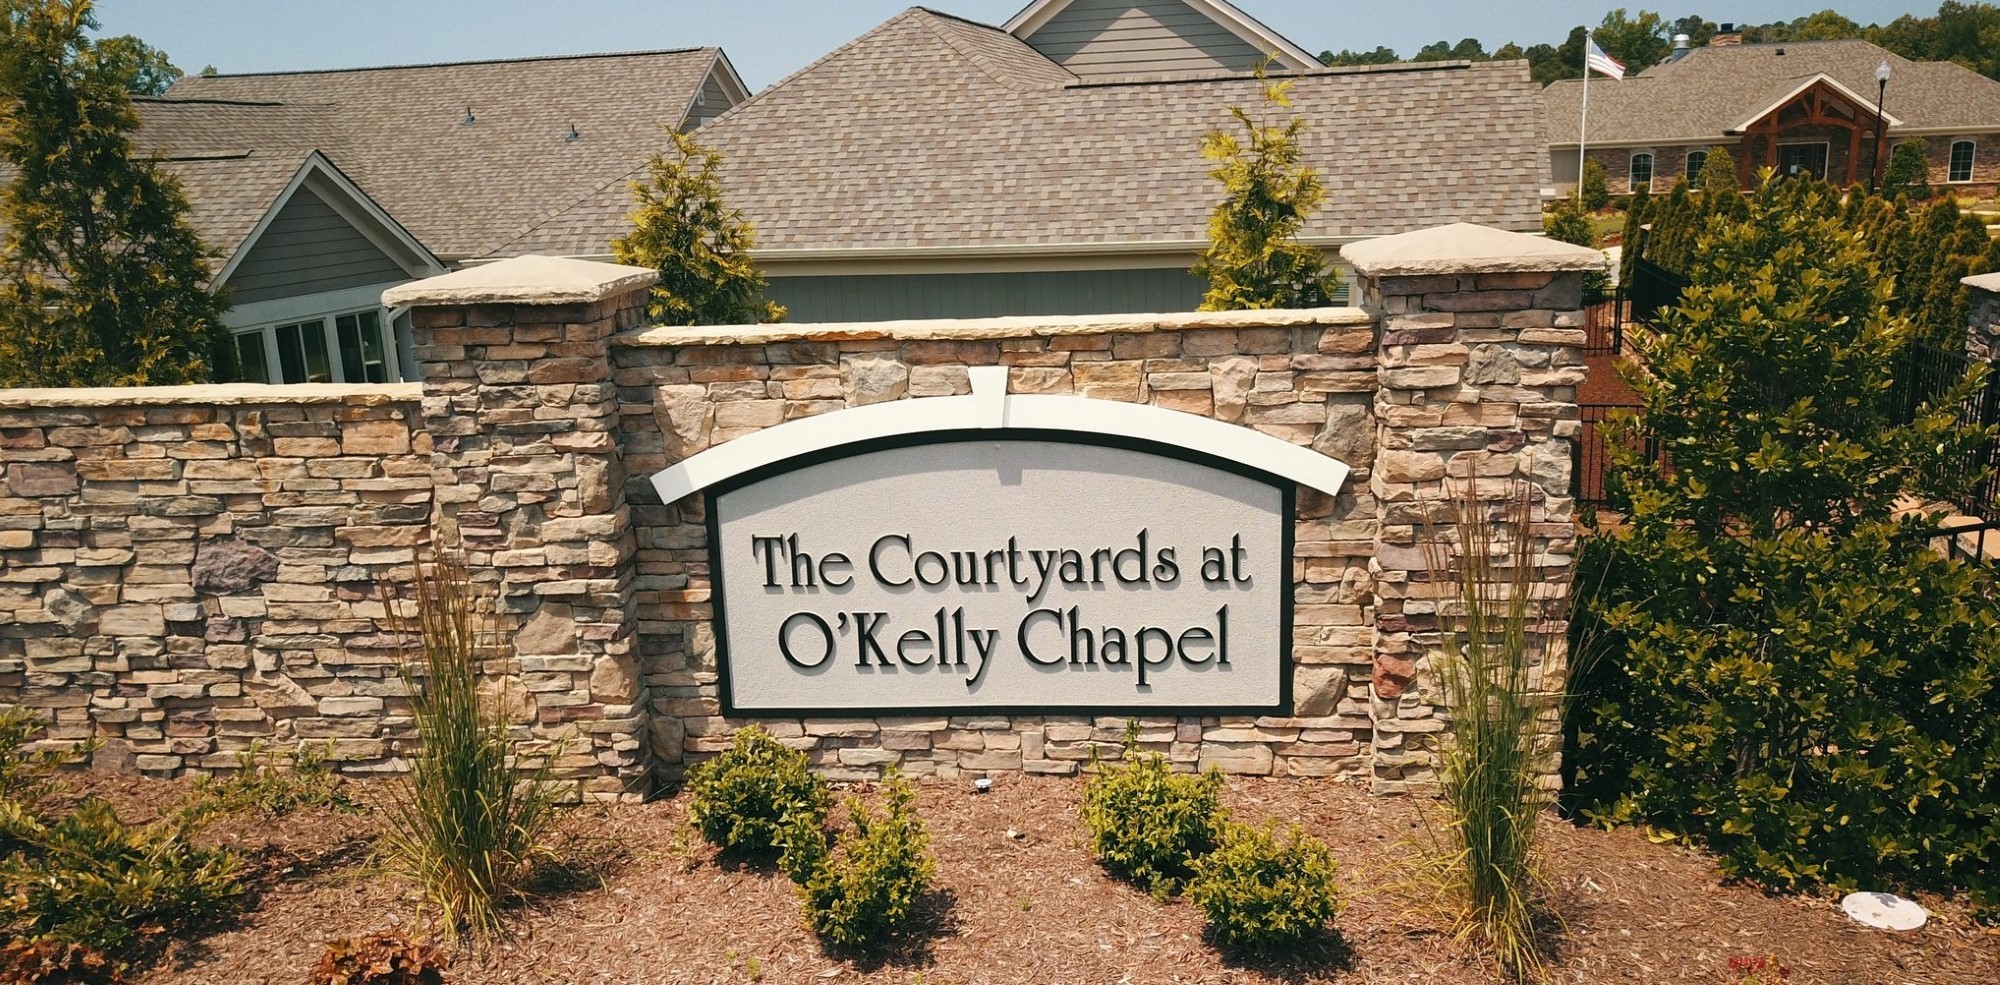 Entrance to the Courtyards at O'Kelly Chapel by Epcon Properties